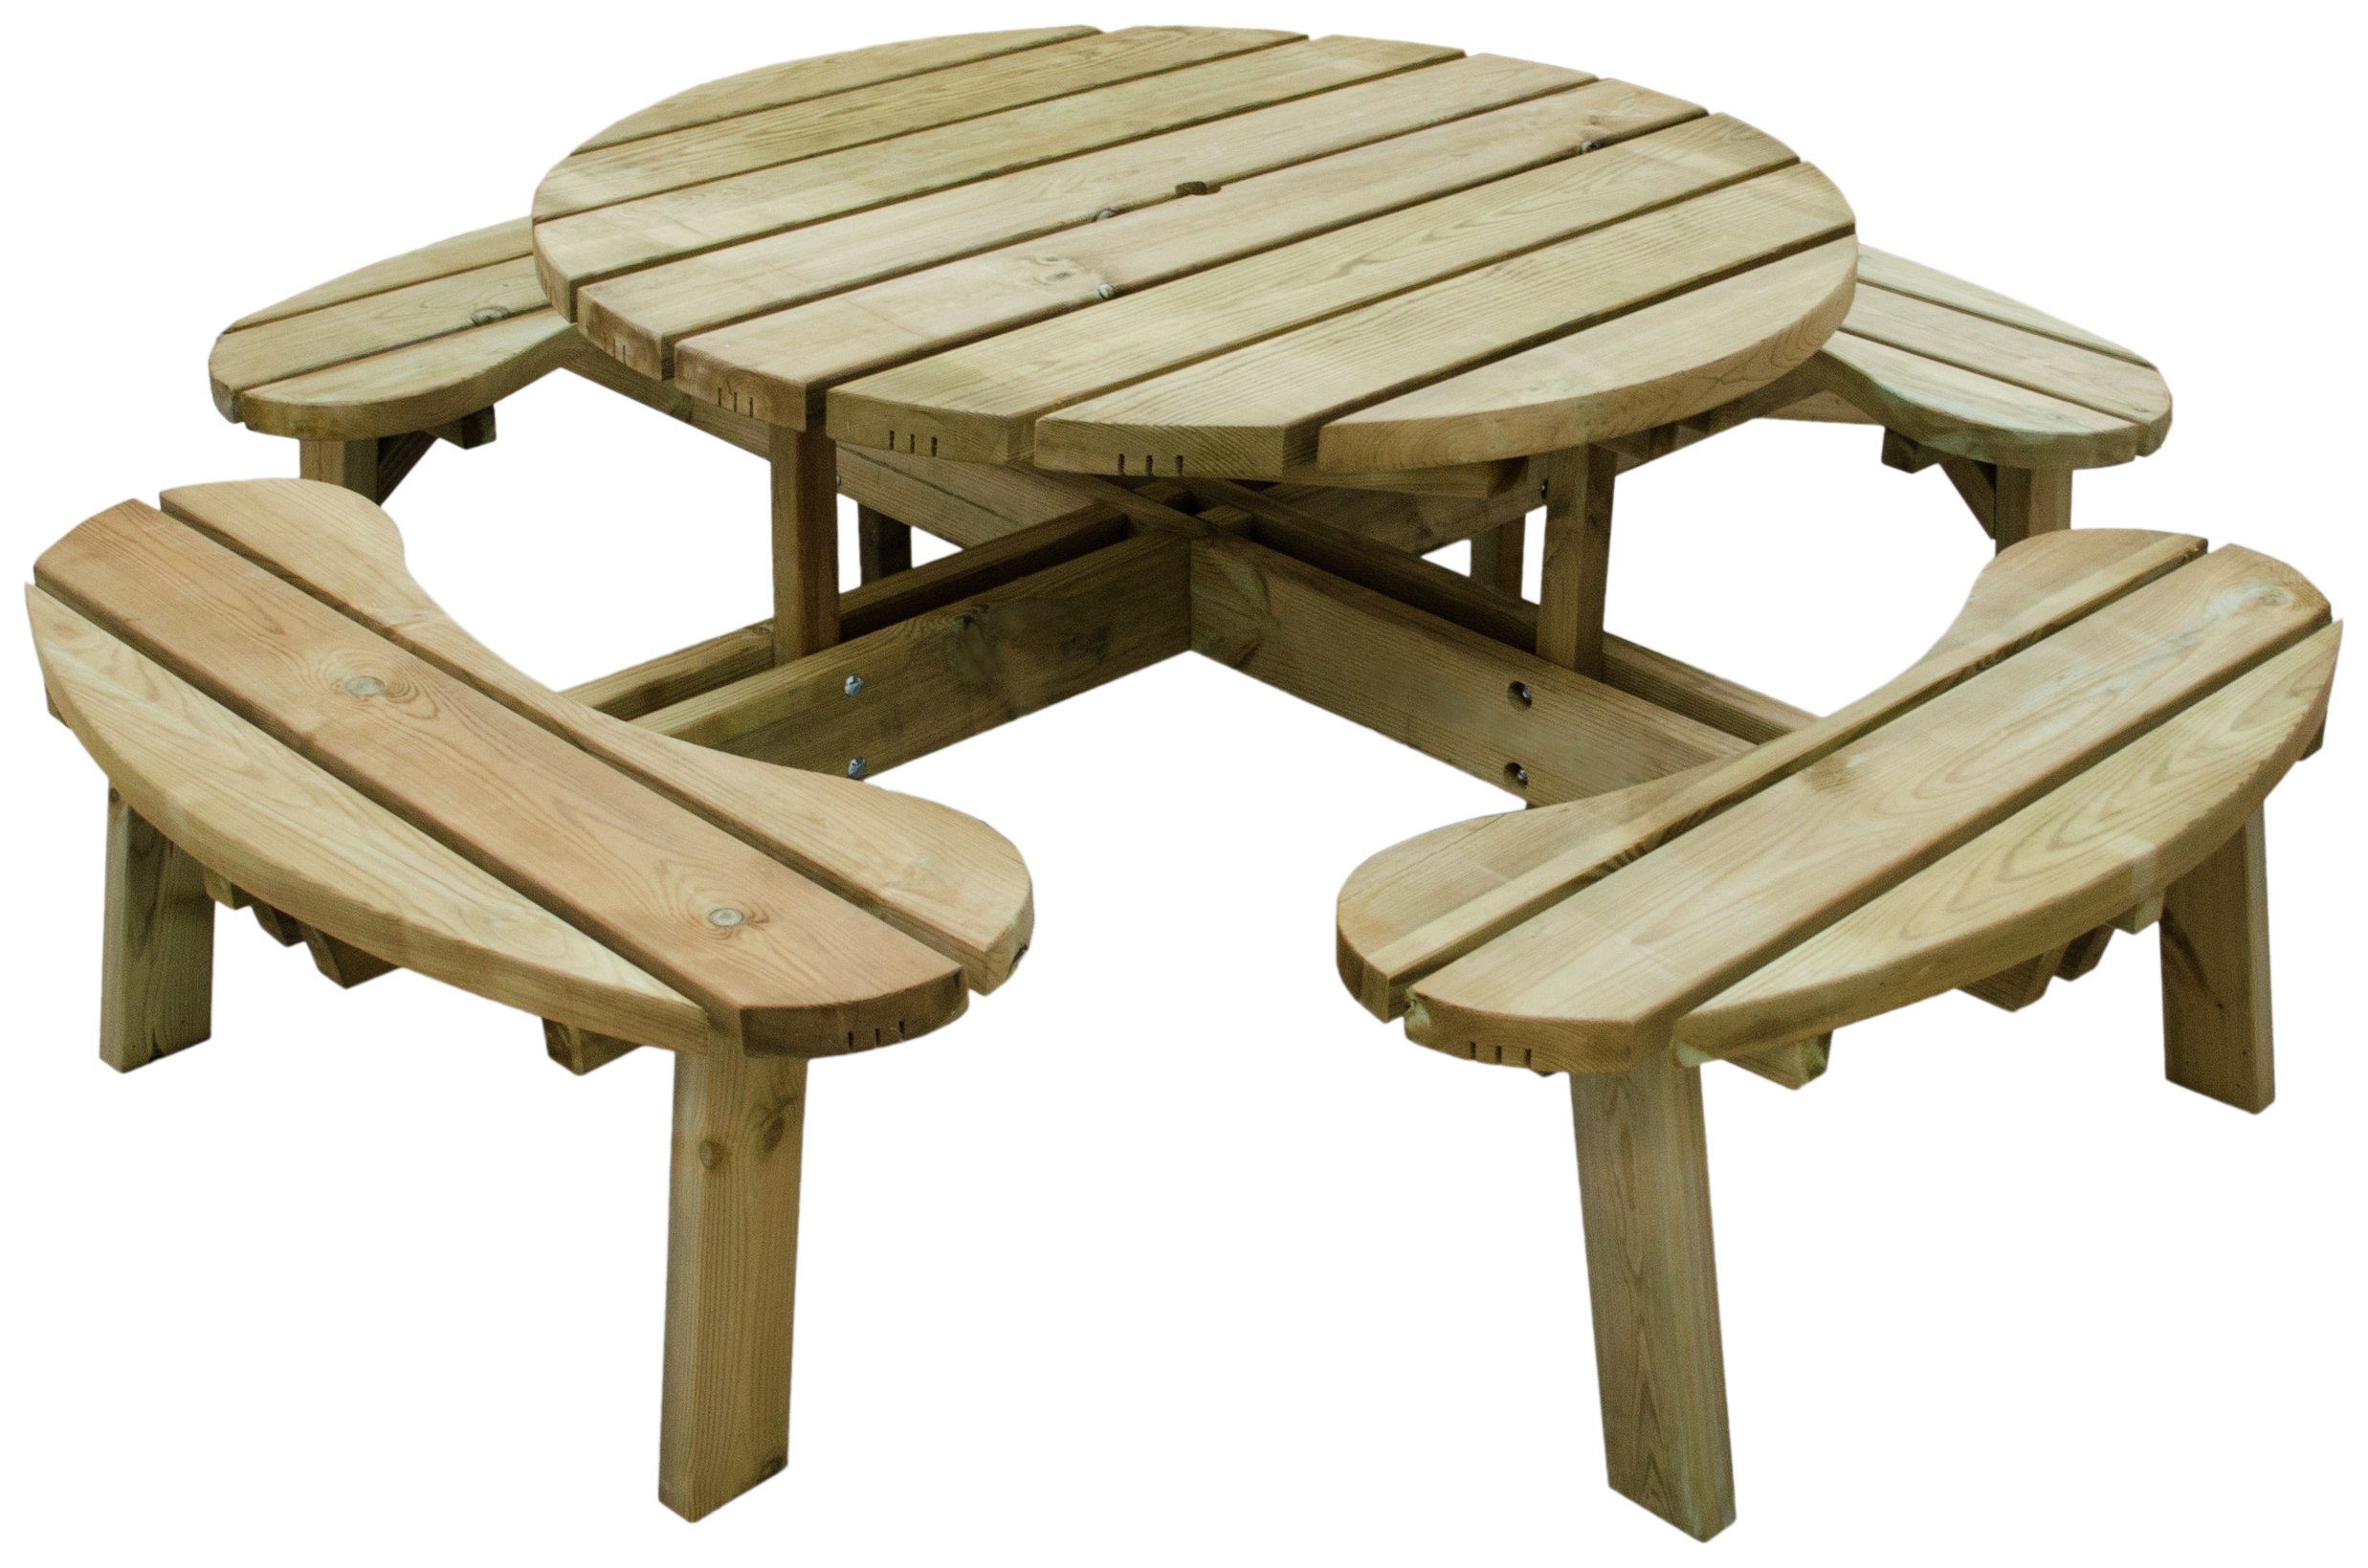 Forest Garden Round 8 Seater Picnic Table